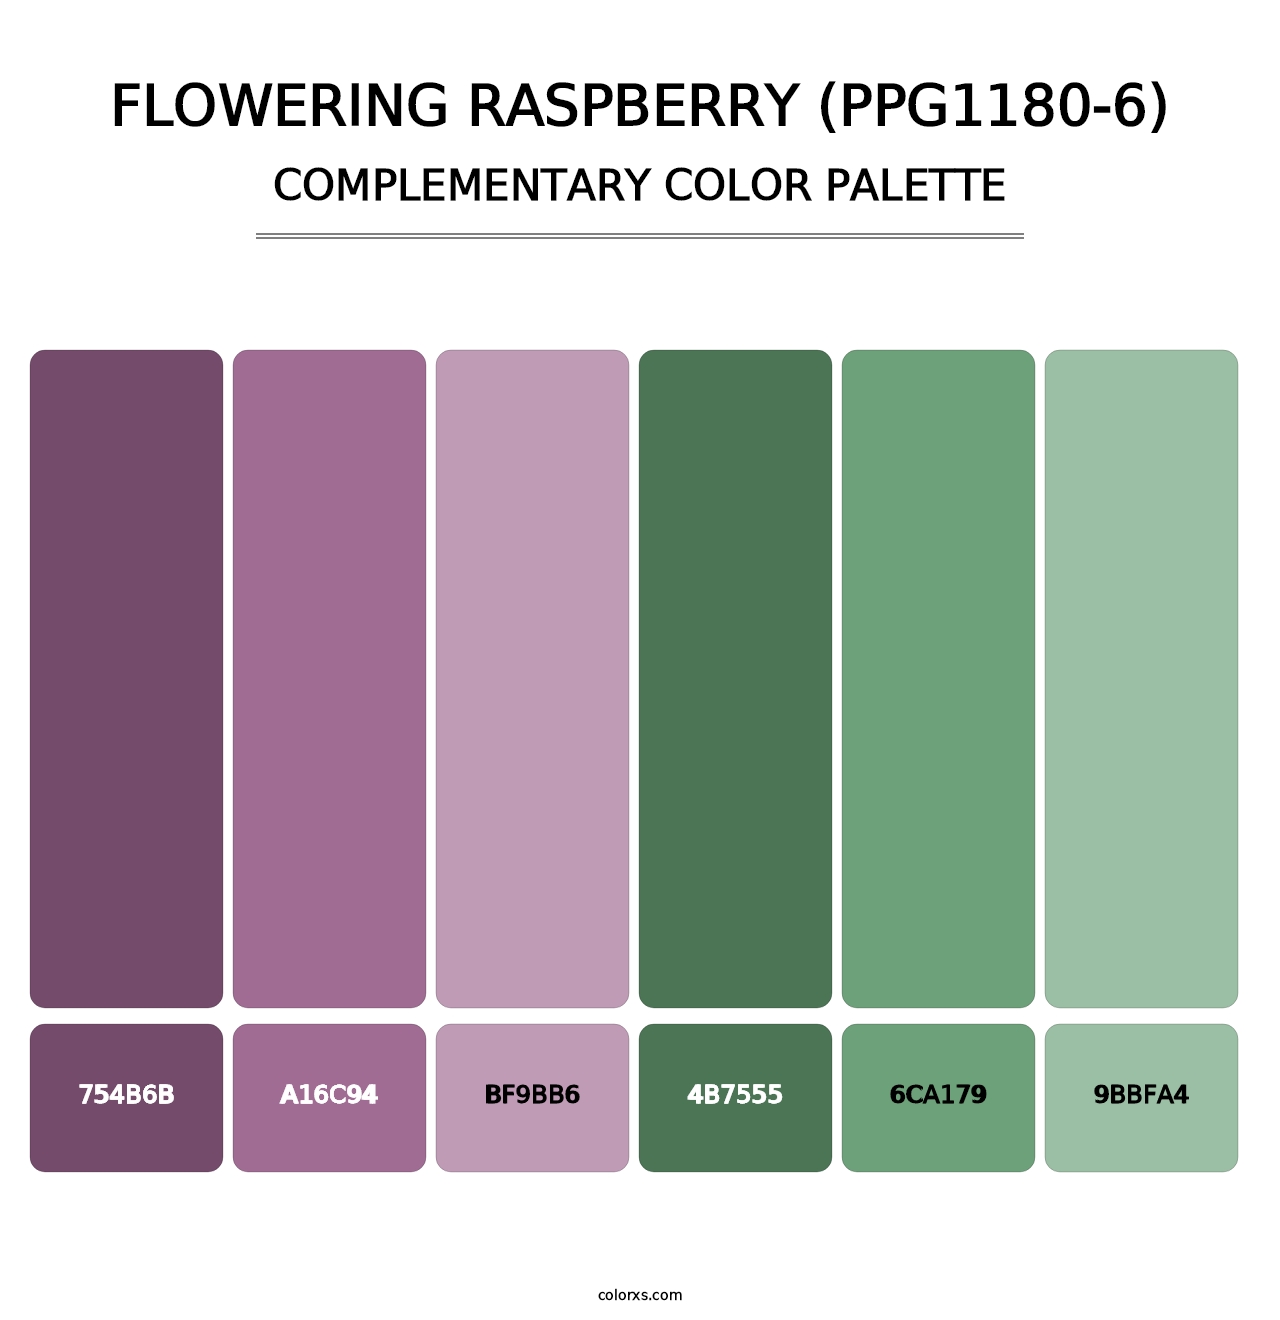 Flowering Raspberry (PPG1180-6) - Complementary Color Palette